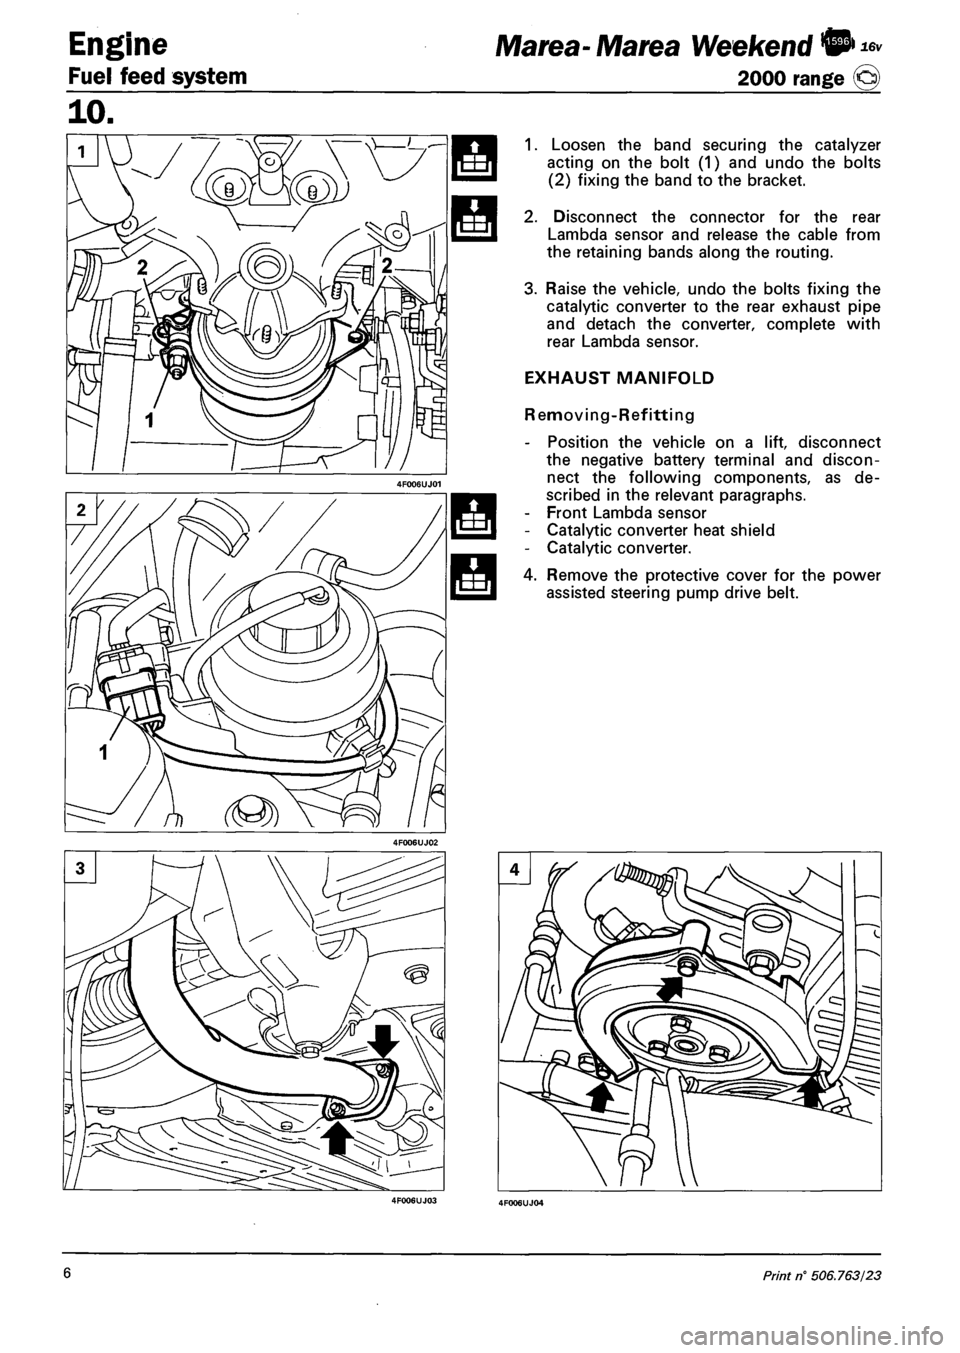 FIAT MAREA 2001 1.G Manual PDF Engine 
Fuel feed system 
16v Marea- Marea Weekend © 
2000 range @ 
1. Loosen the band securing the catalyzer 
acting on the bolt (1) and undo the bolts 
(2) fixing the band to the bracket. 
2. Disco